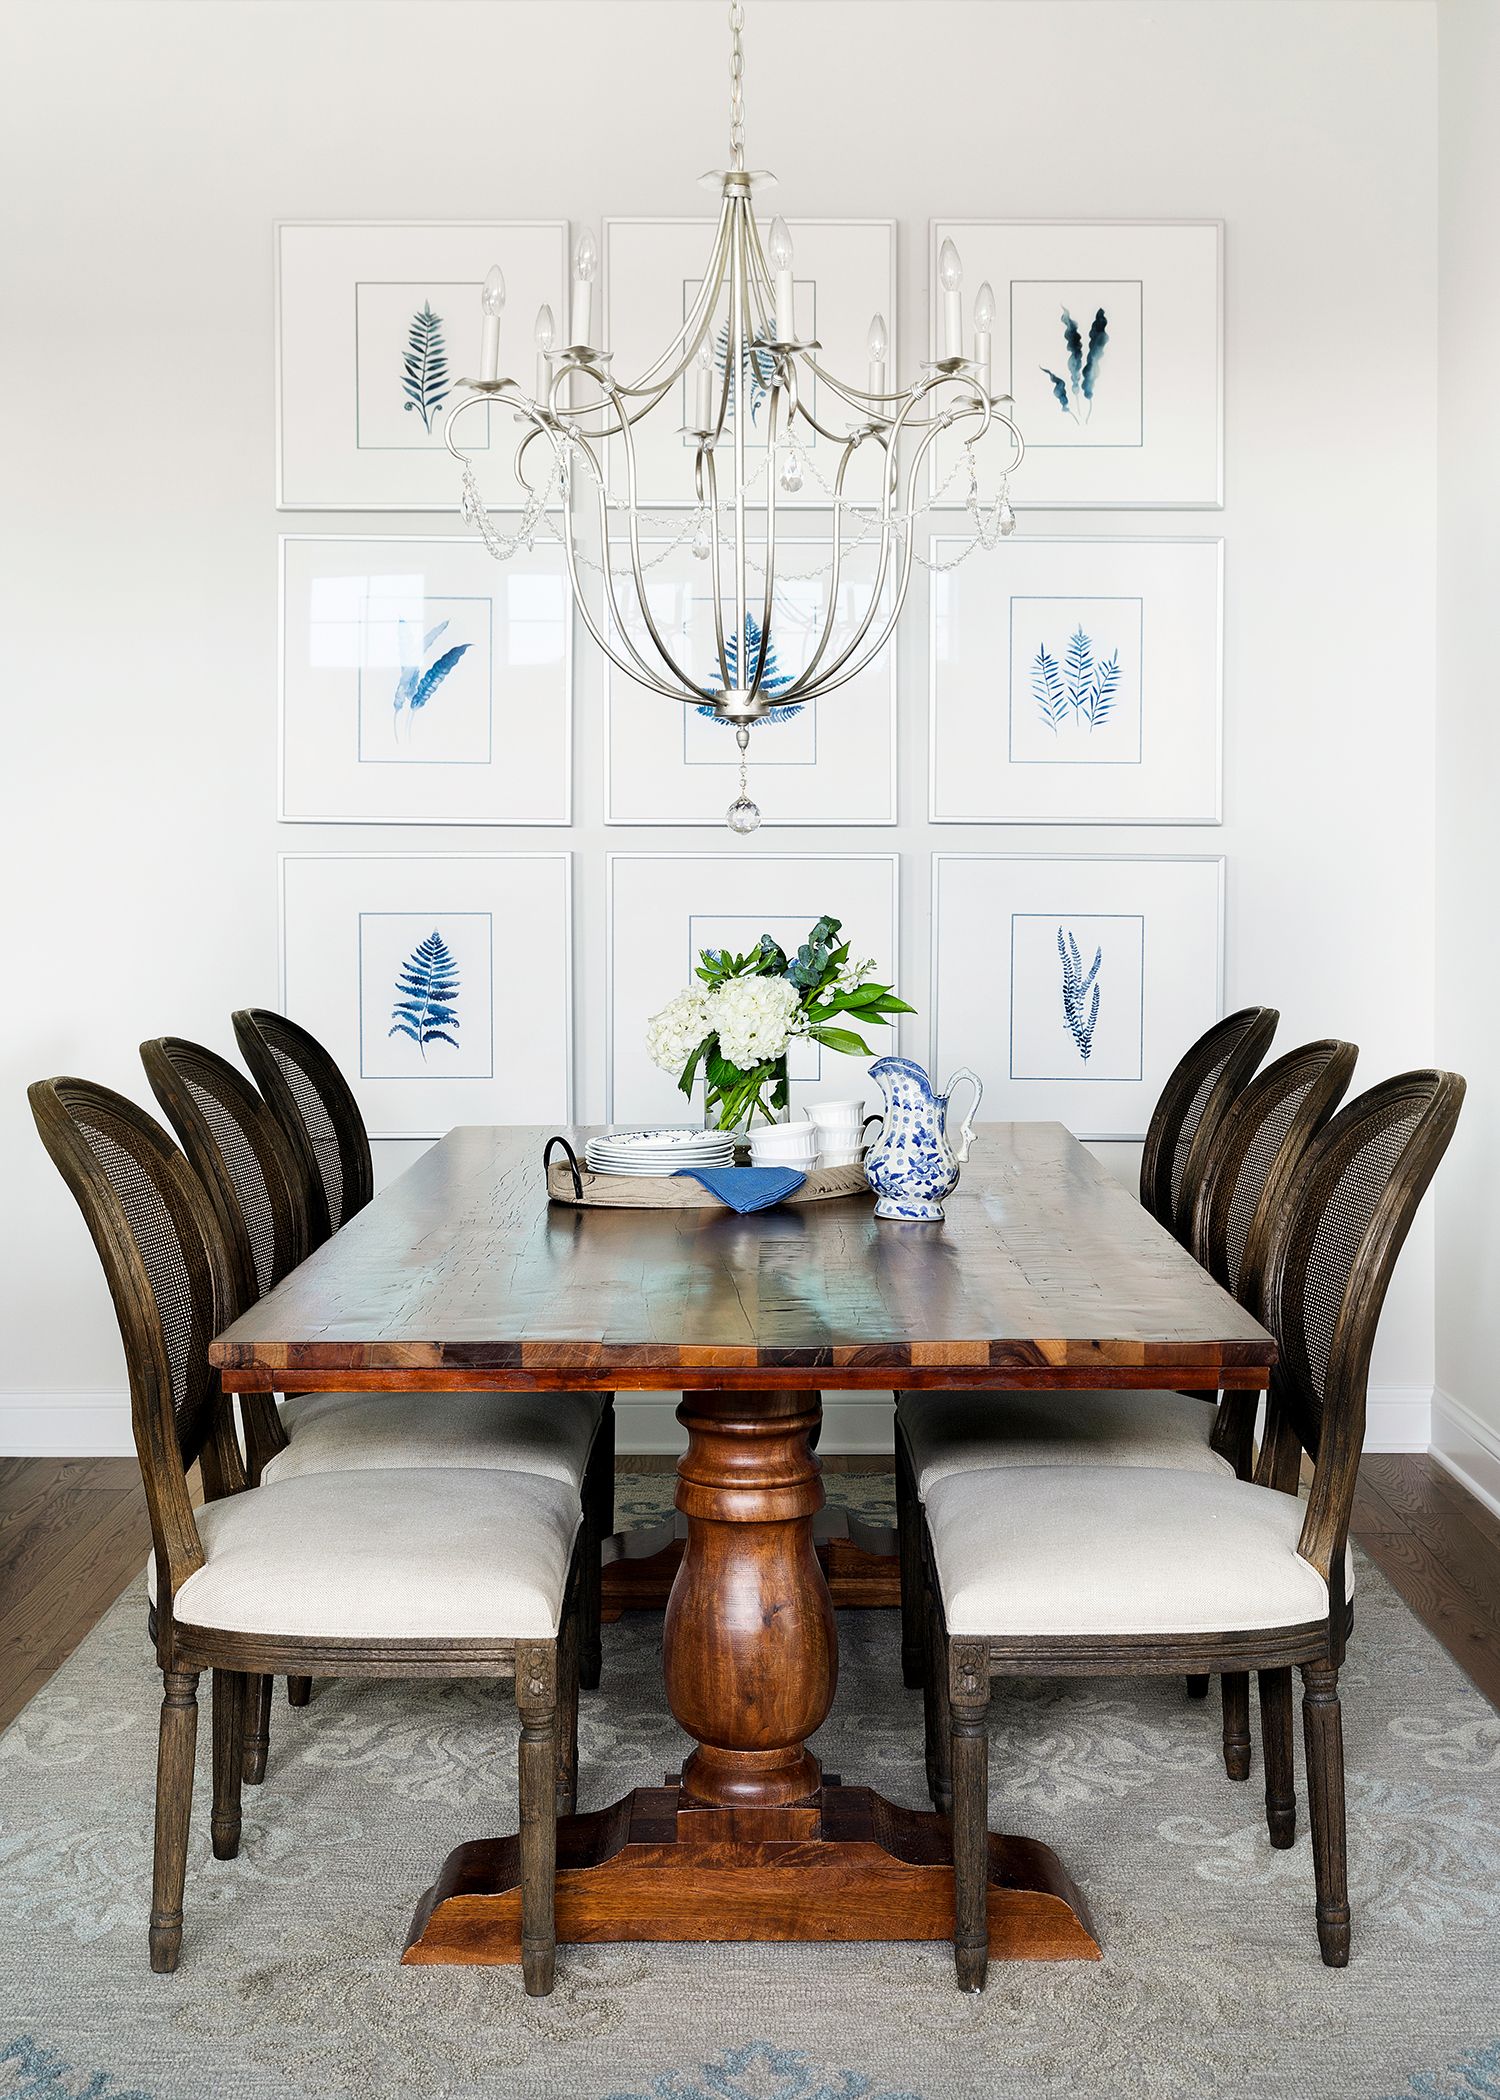 how to decorate a dining room table ideas